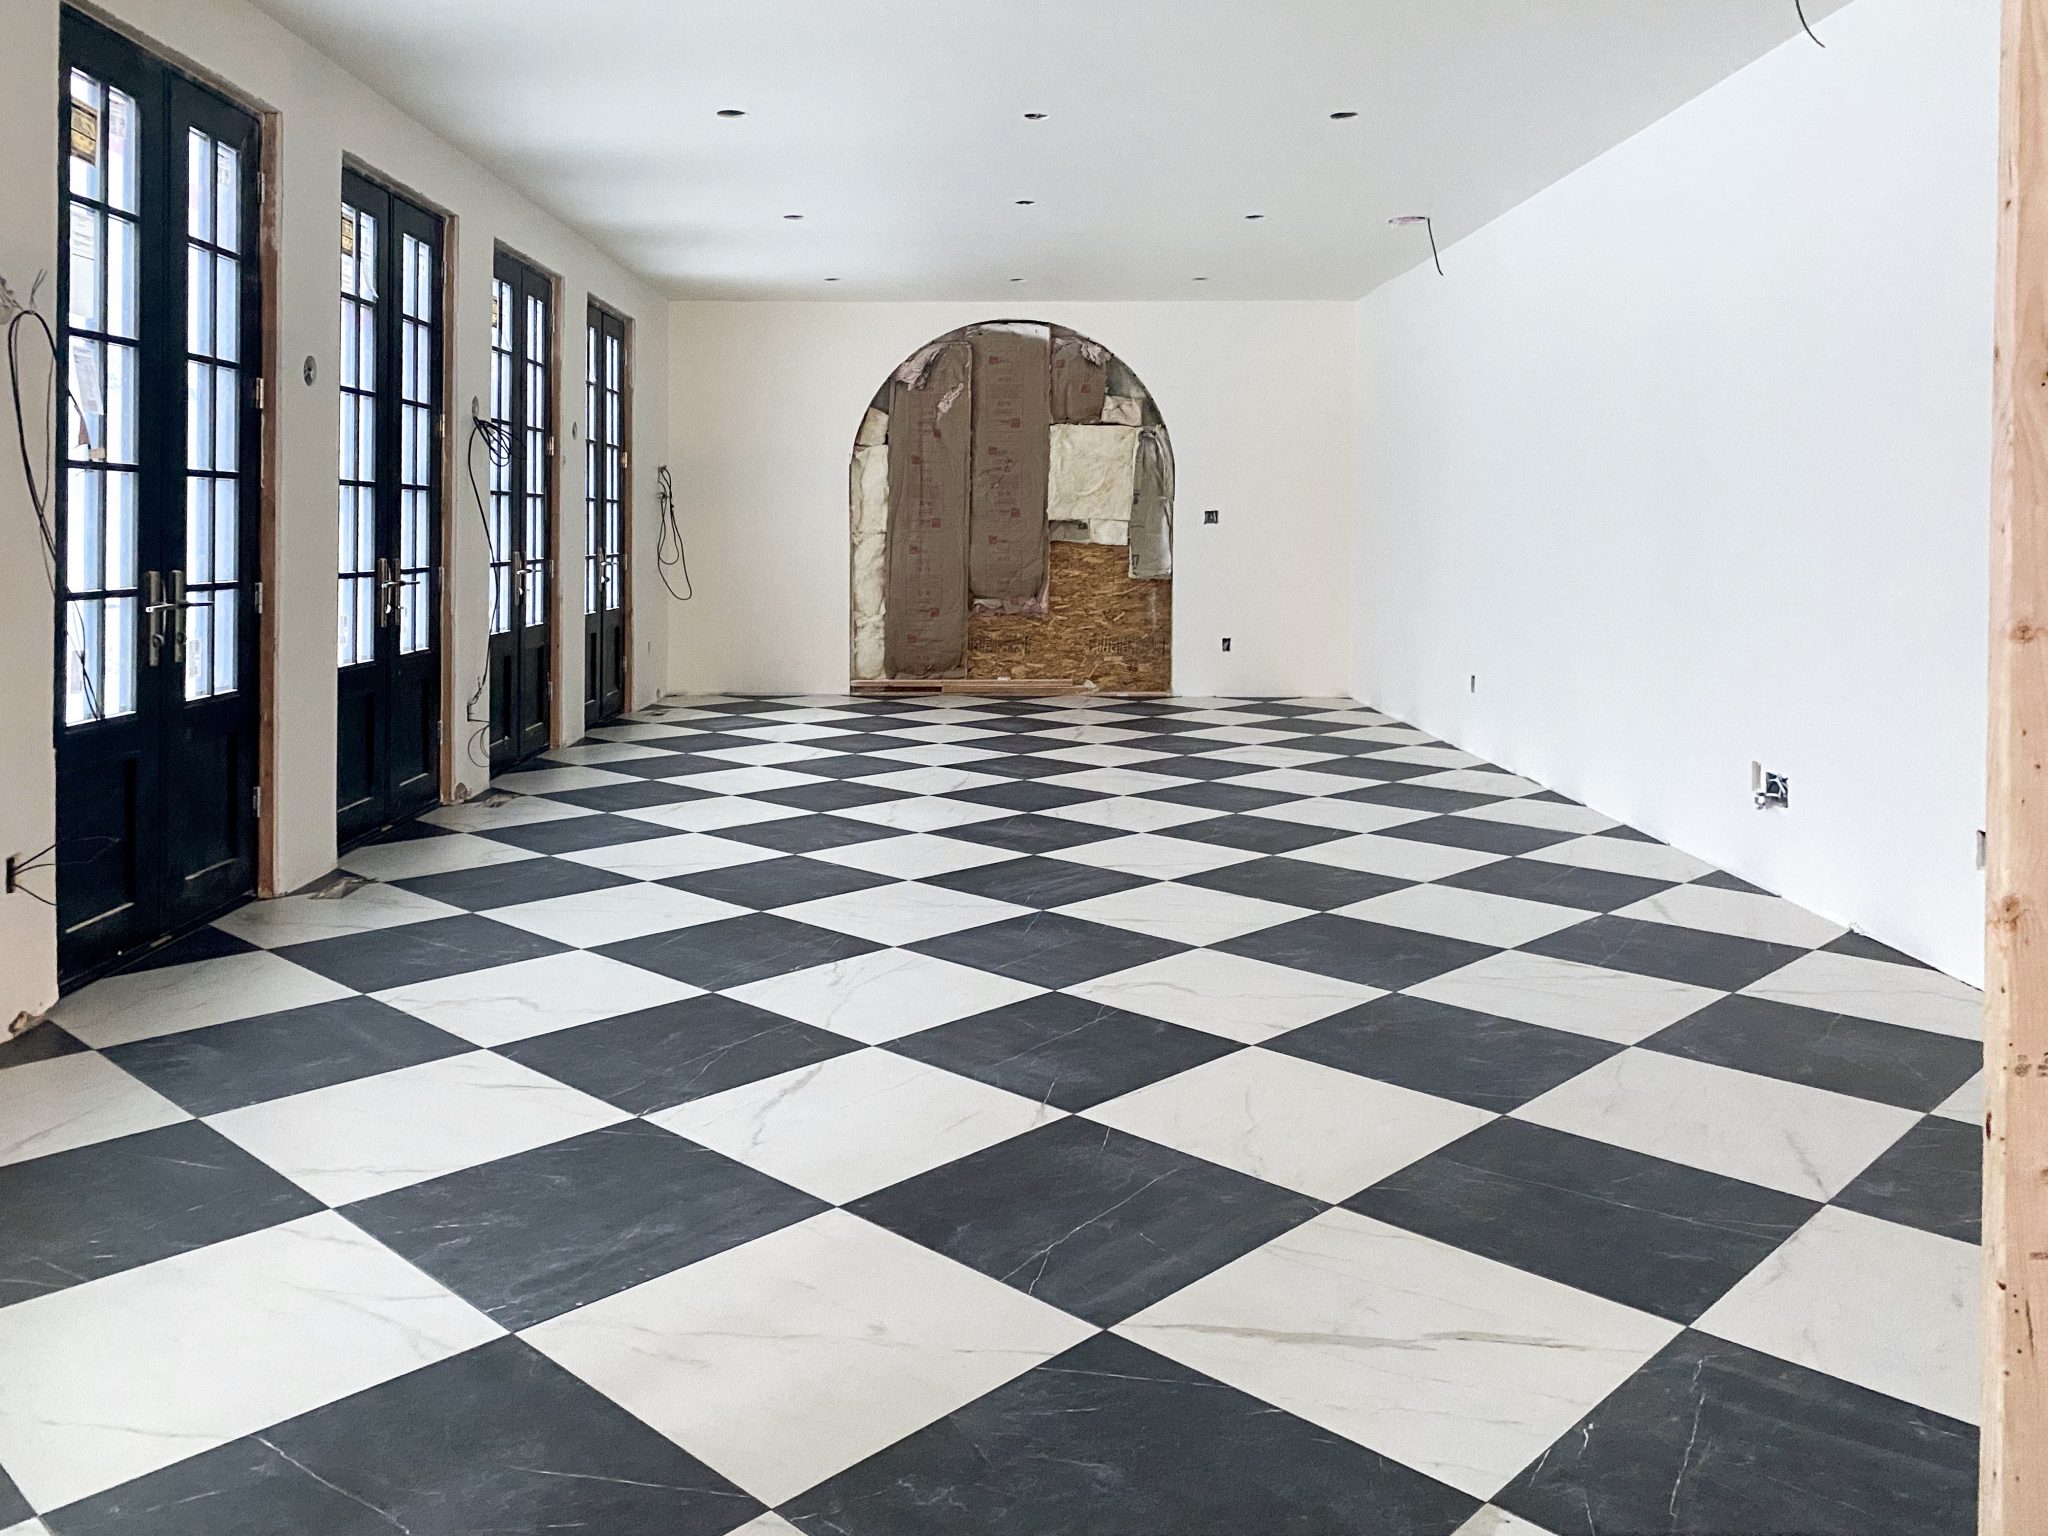 Stone Checkerboard Floors, Checkerboard Tile Floor Images